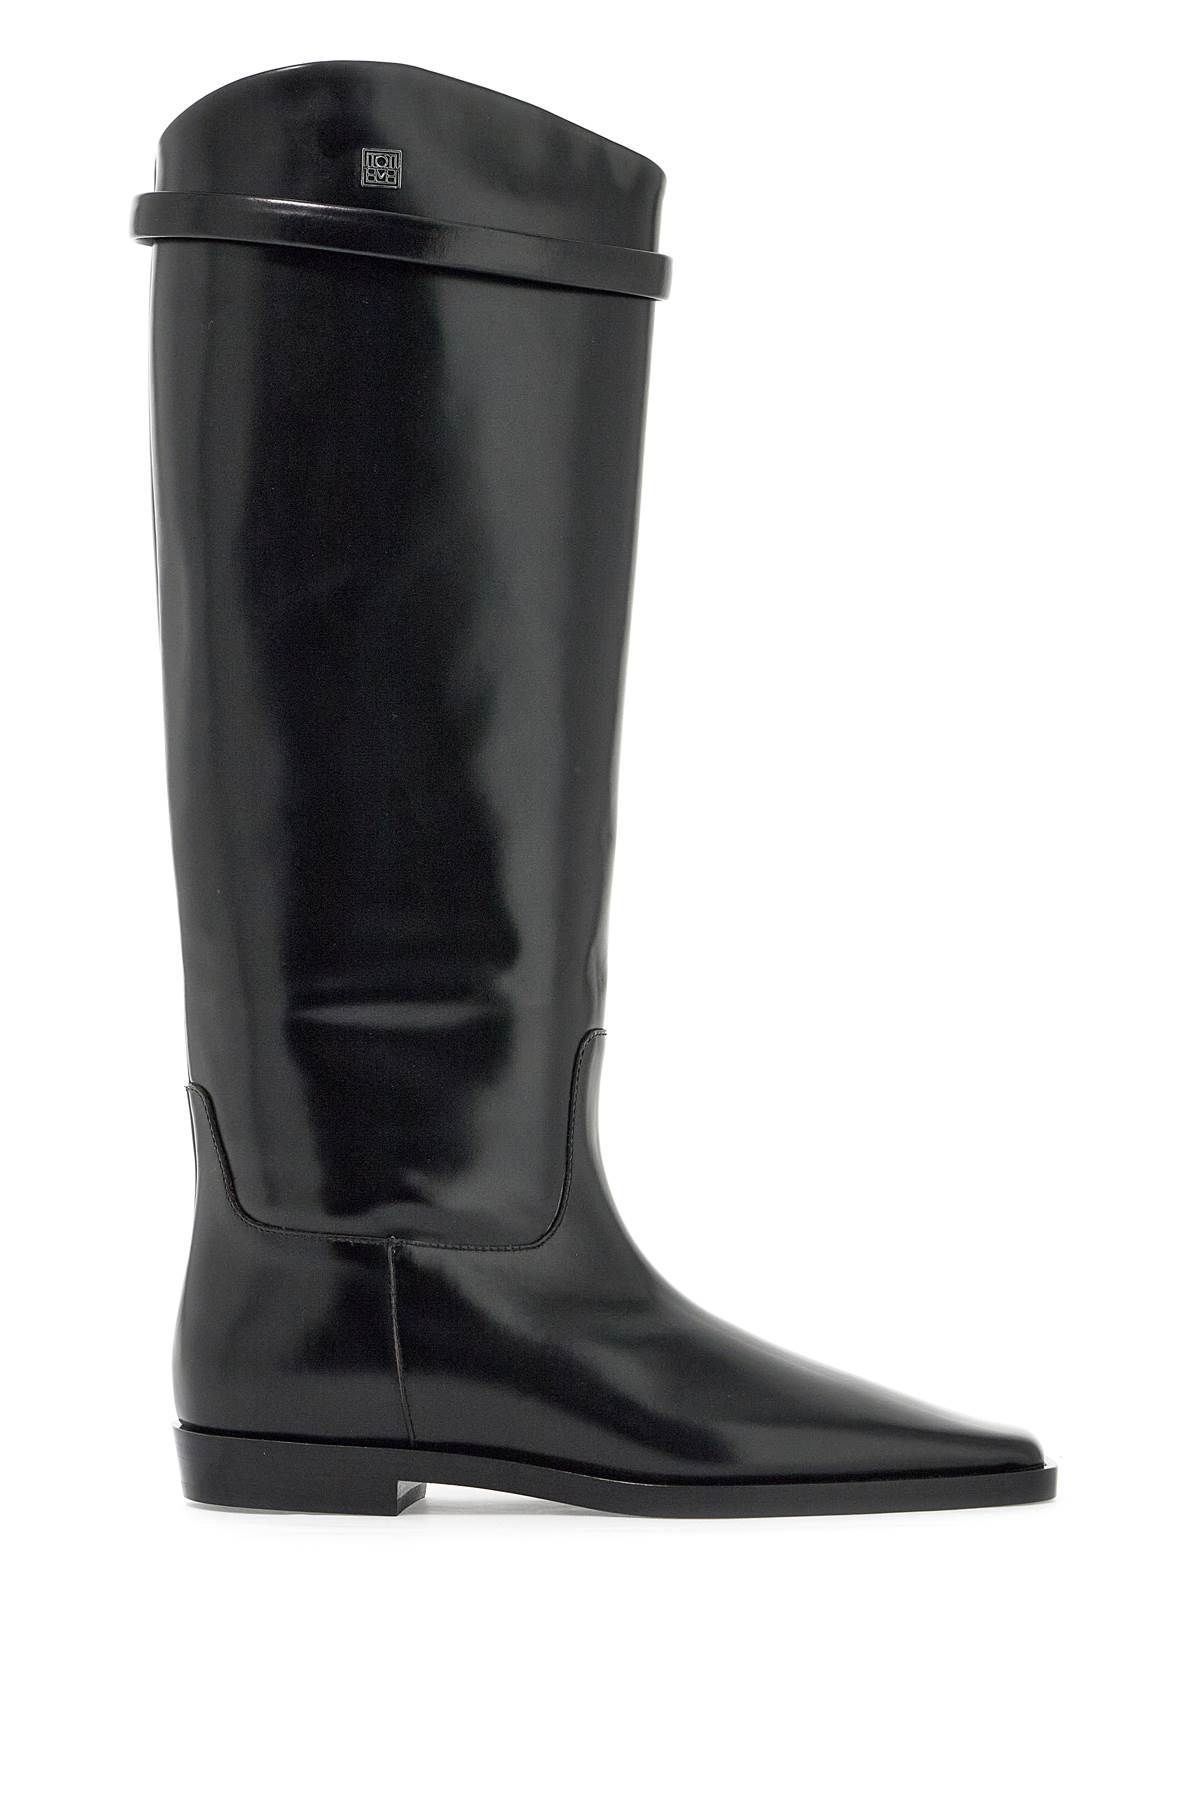 Toteme TOTEME leather riding boot